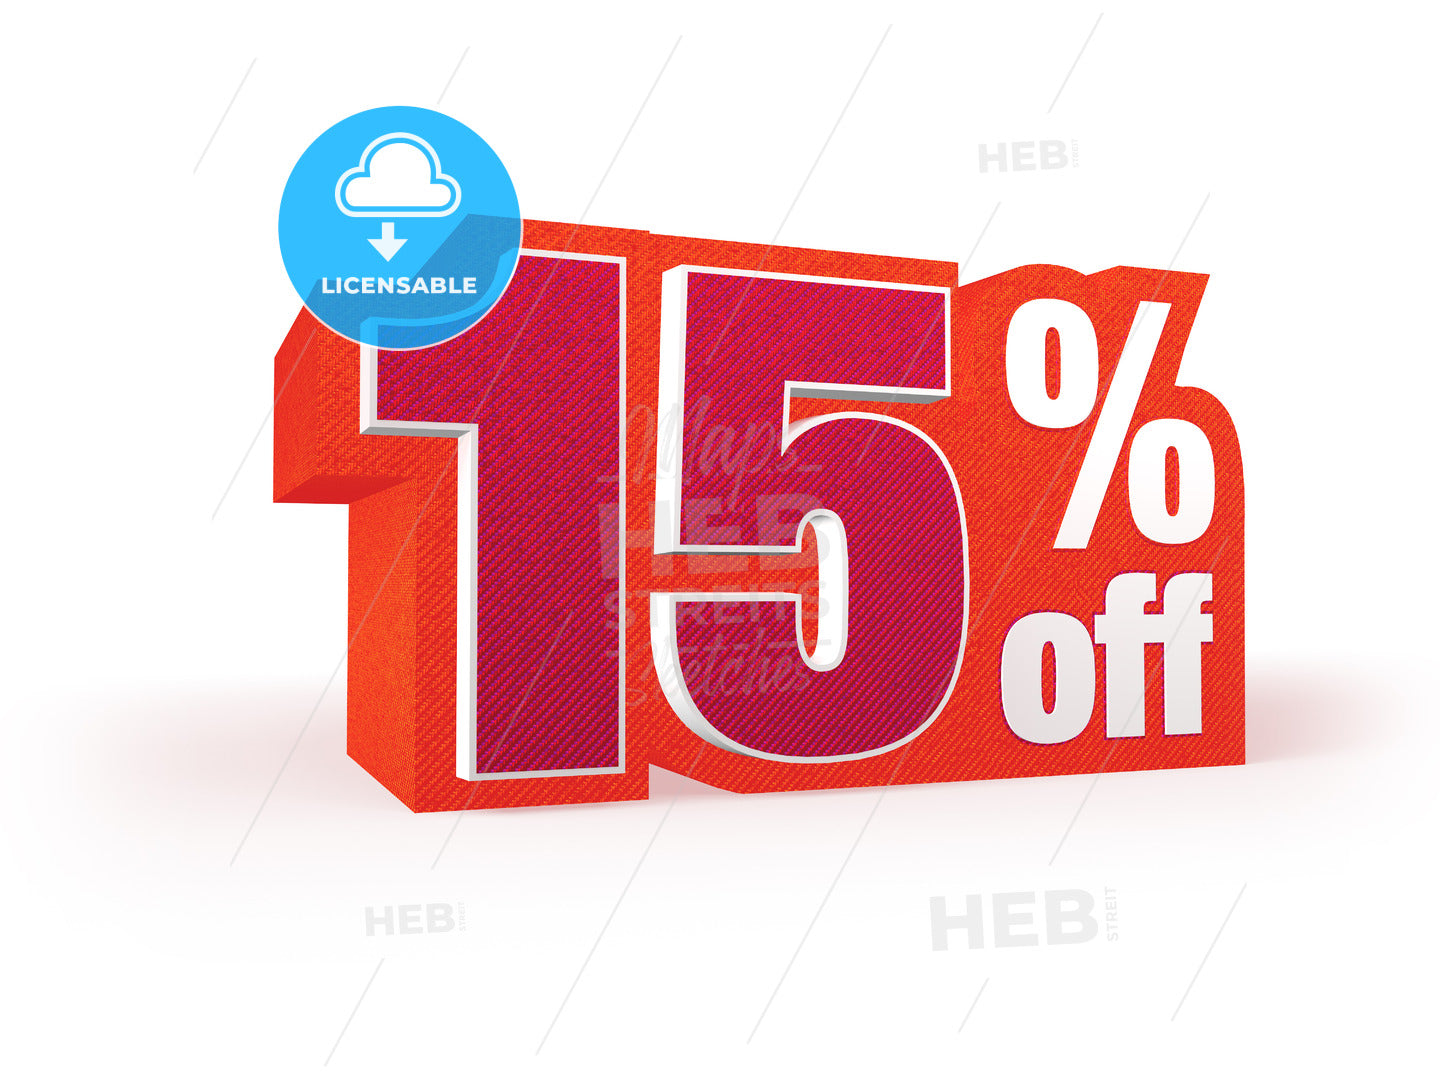 15 percent off red wool styled discount price sign – instant download